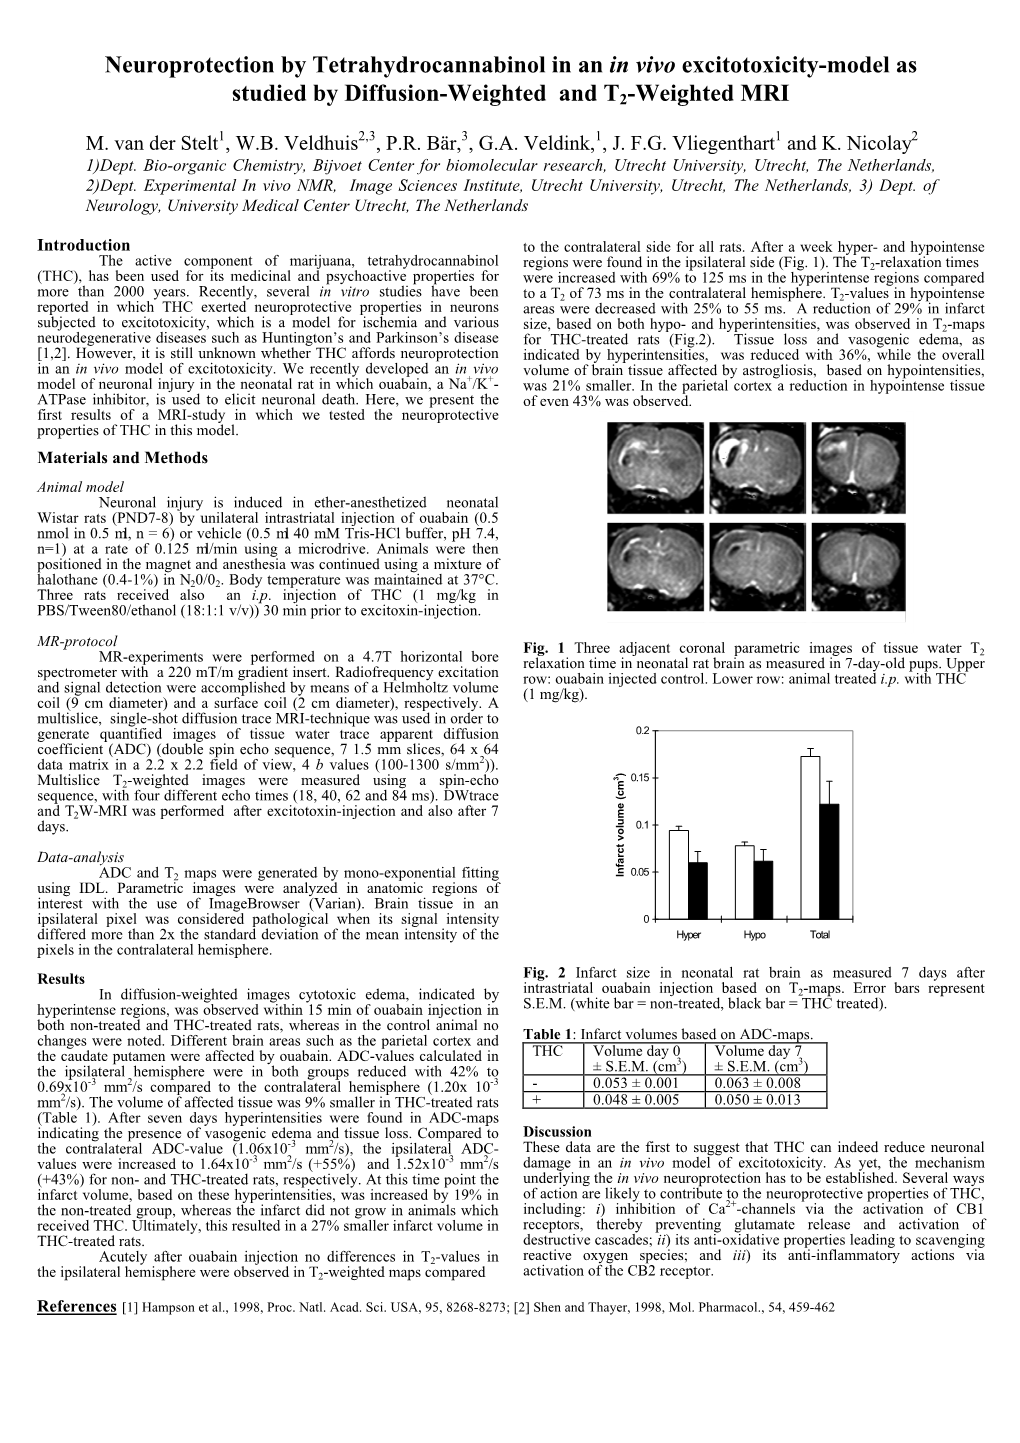 Neuroprotection by Tetrahydrocannabinol in an in Vivo Excitotoxicity-Model As Studied by Diffusion-Weighted and T2-Weighted MRI